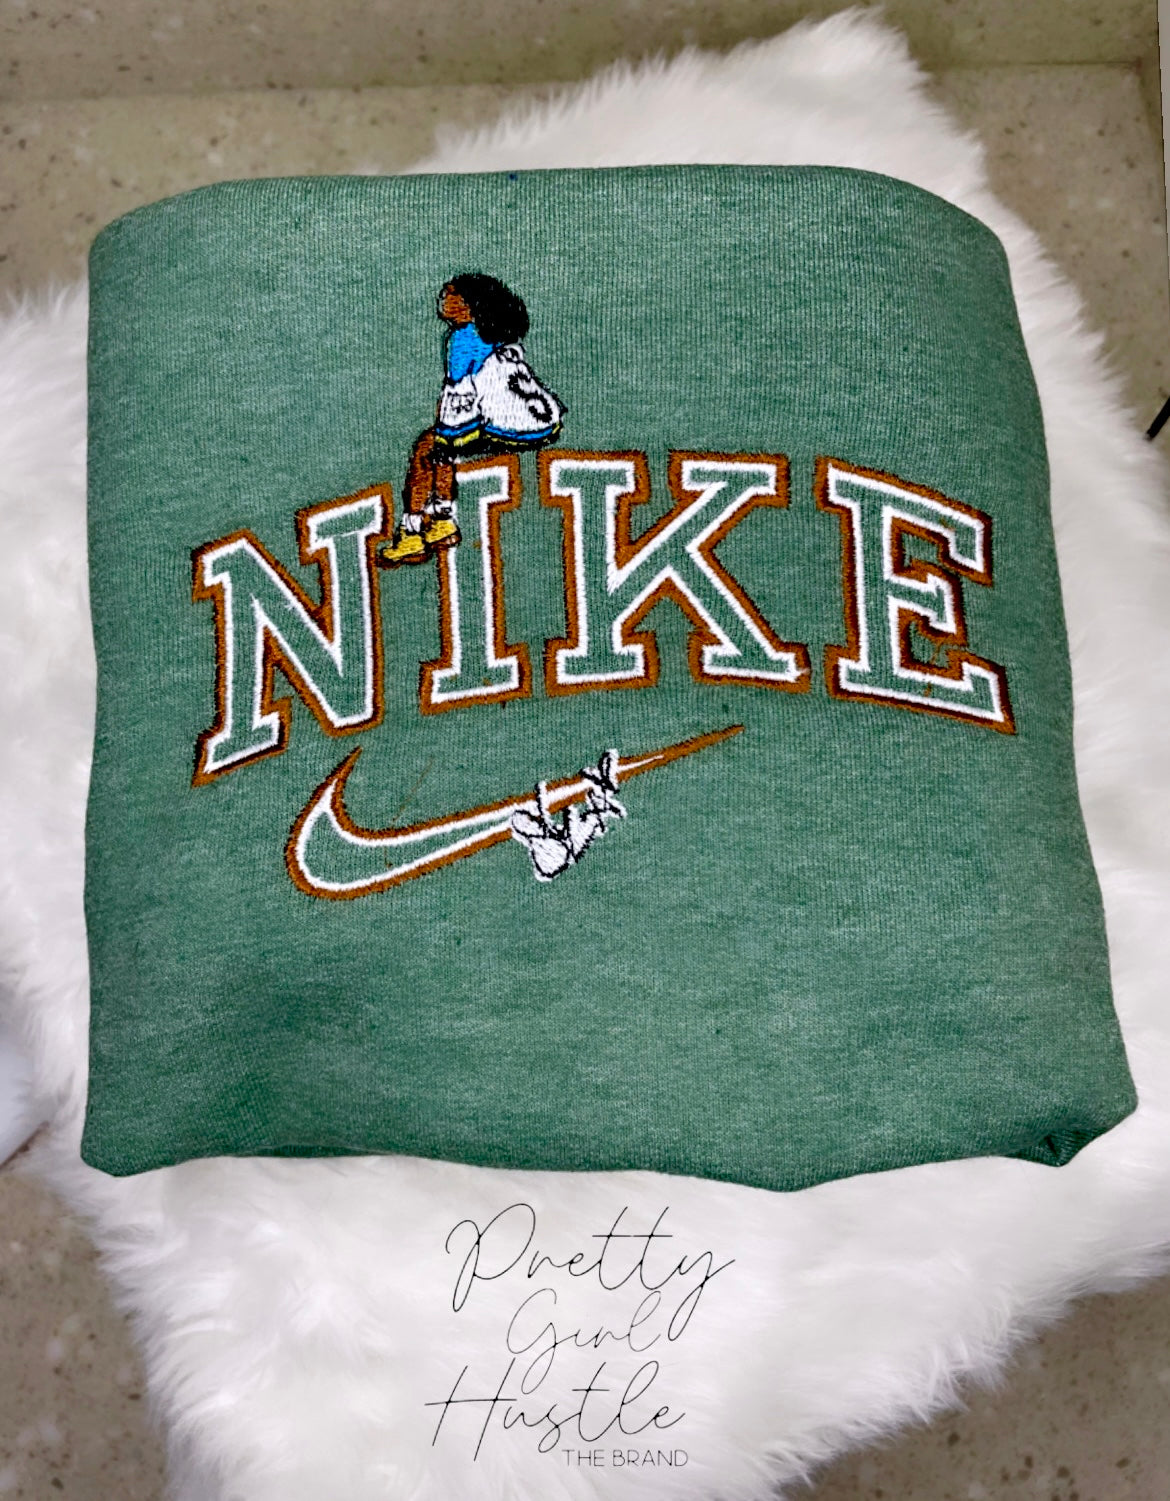 “NIKE” SZA Embroidered Sweater